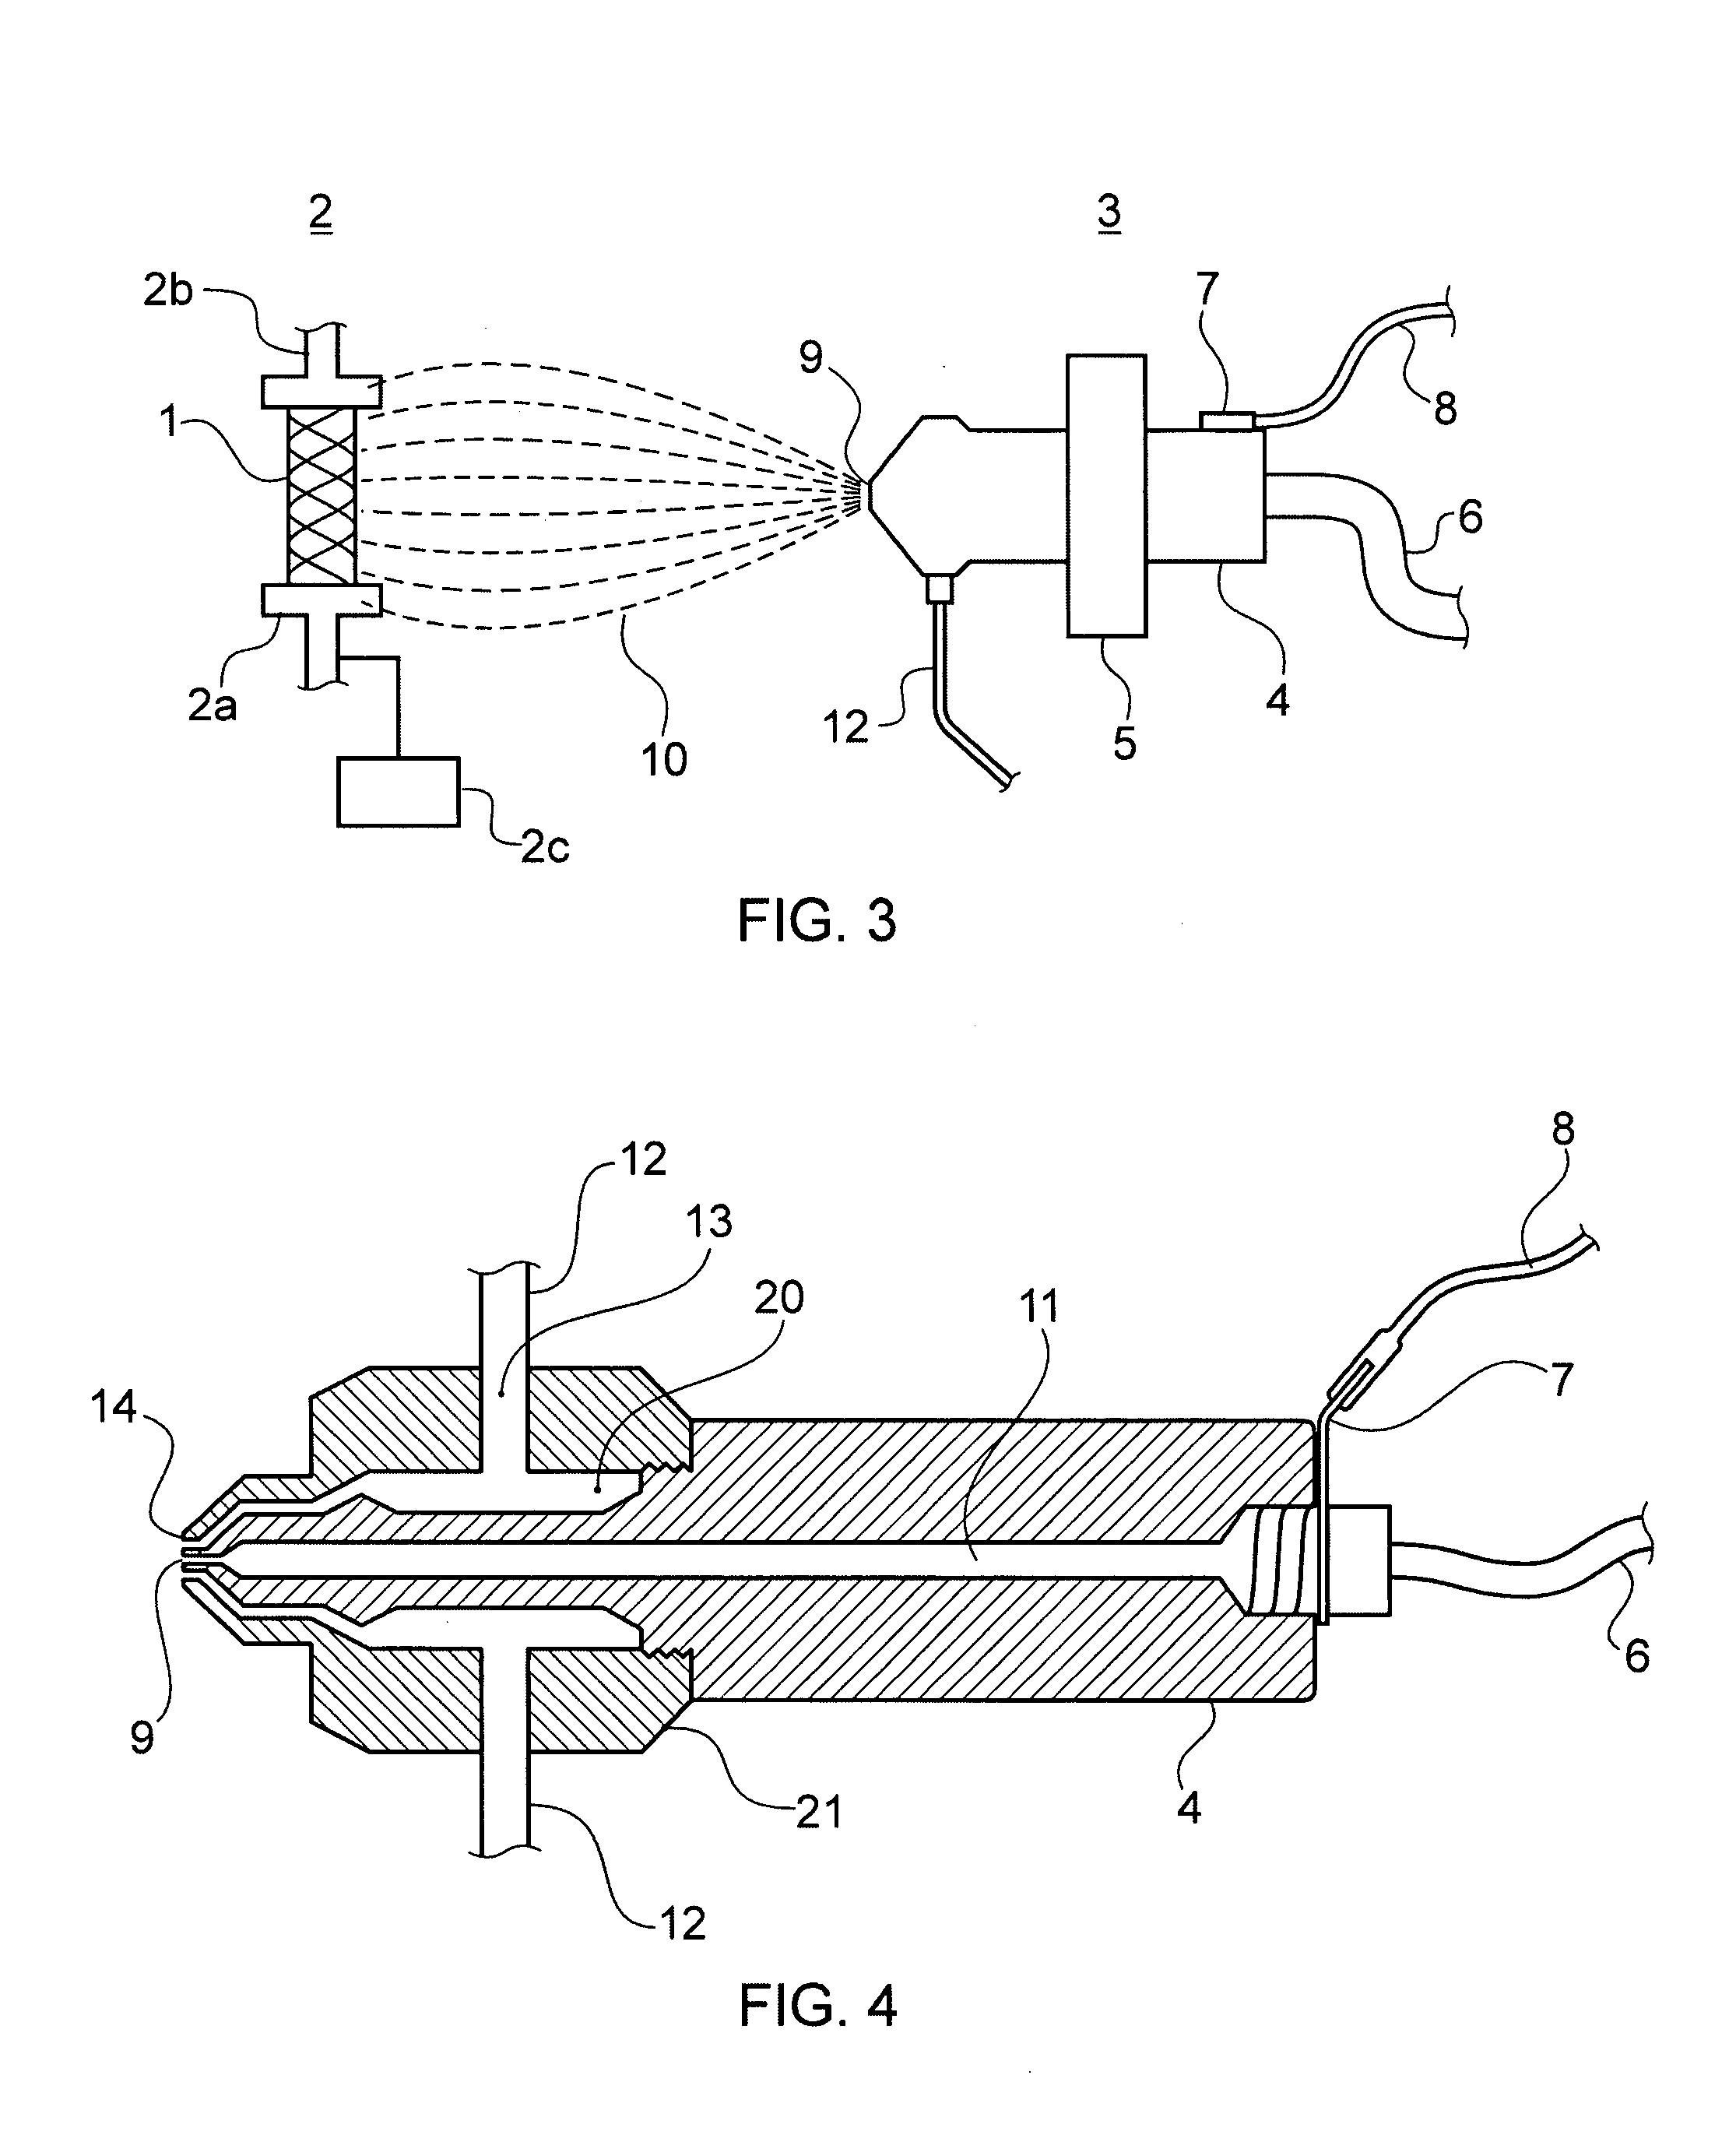 Apparatus and method for electrostatic spray coating of medical devices